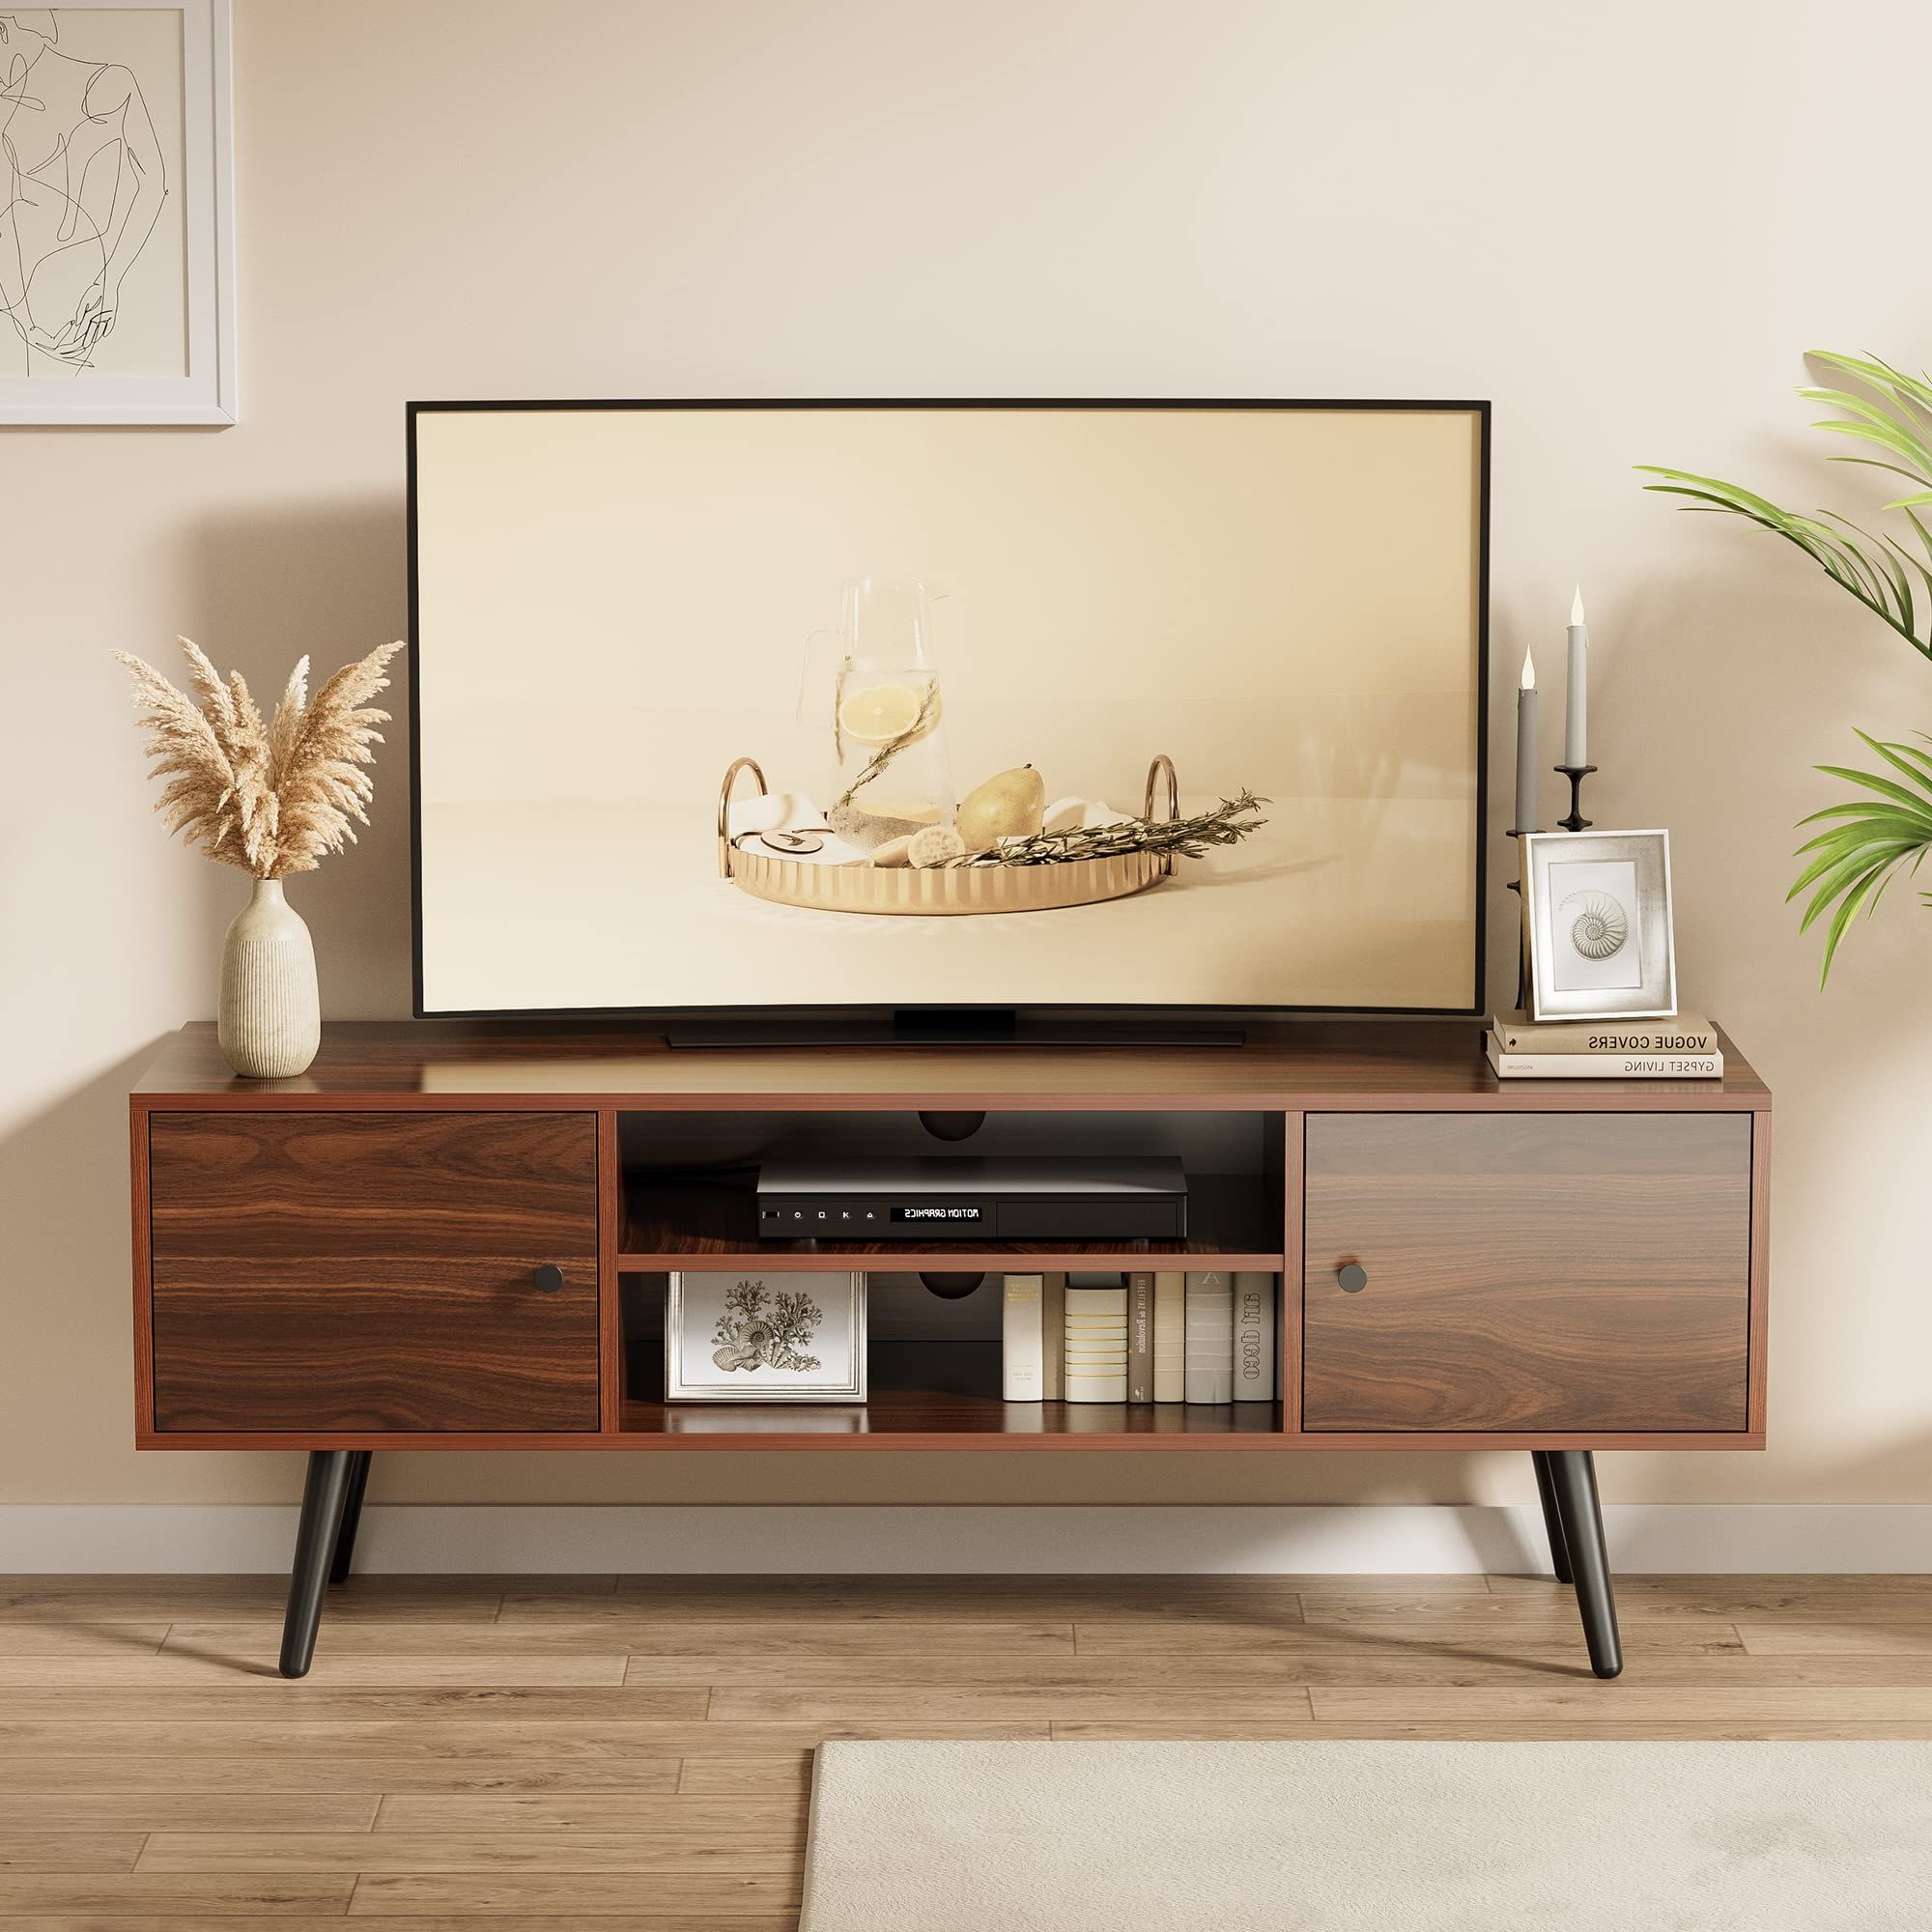 Buy Cozy Castle Mid Century Modern Tv Stand For 55/60 Inch Tv Throughout 2019 Mid Century Entertainment Centers (View 9 of 15)